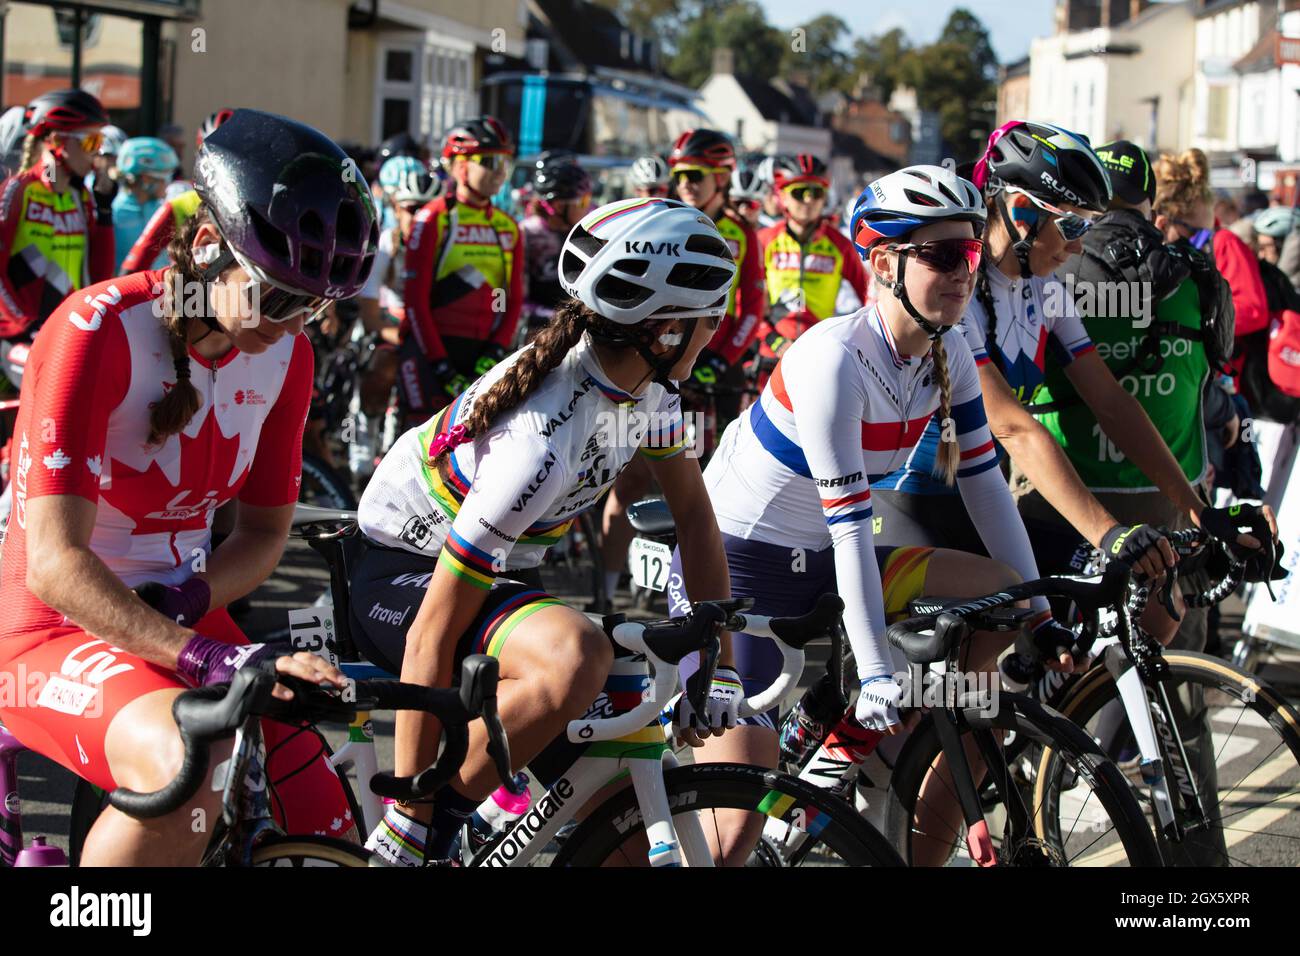 Bicester, UK - October 2021: Competitors line up at the start of the Womens Tour a cycle race in the UK Stock Photo